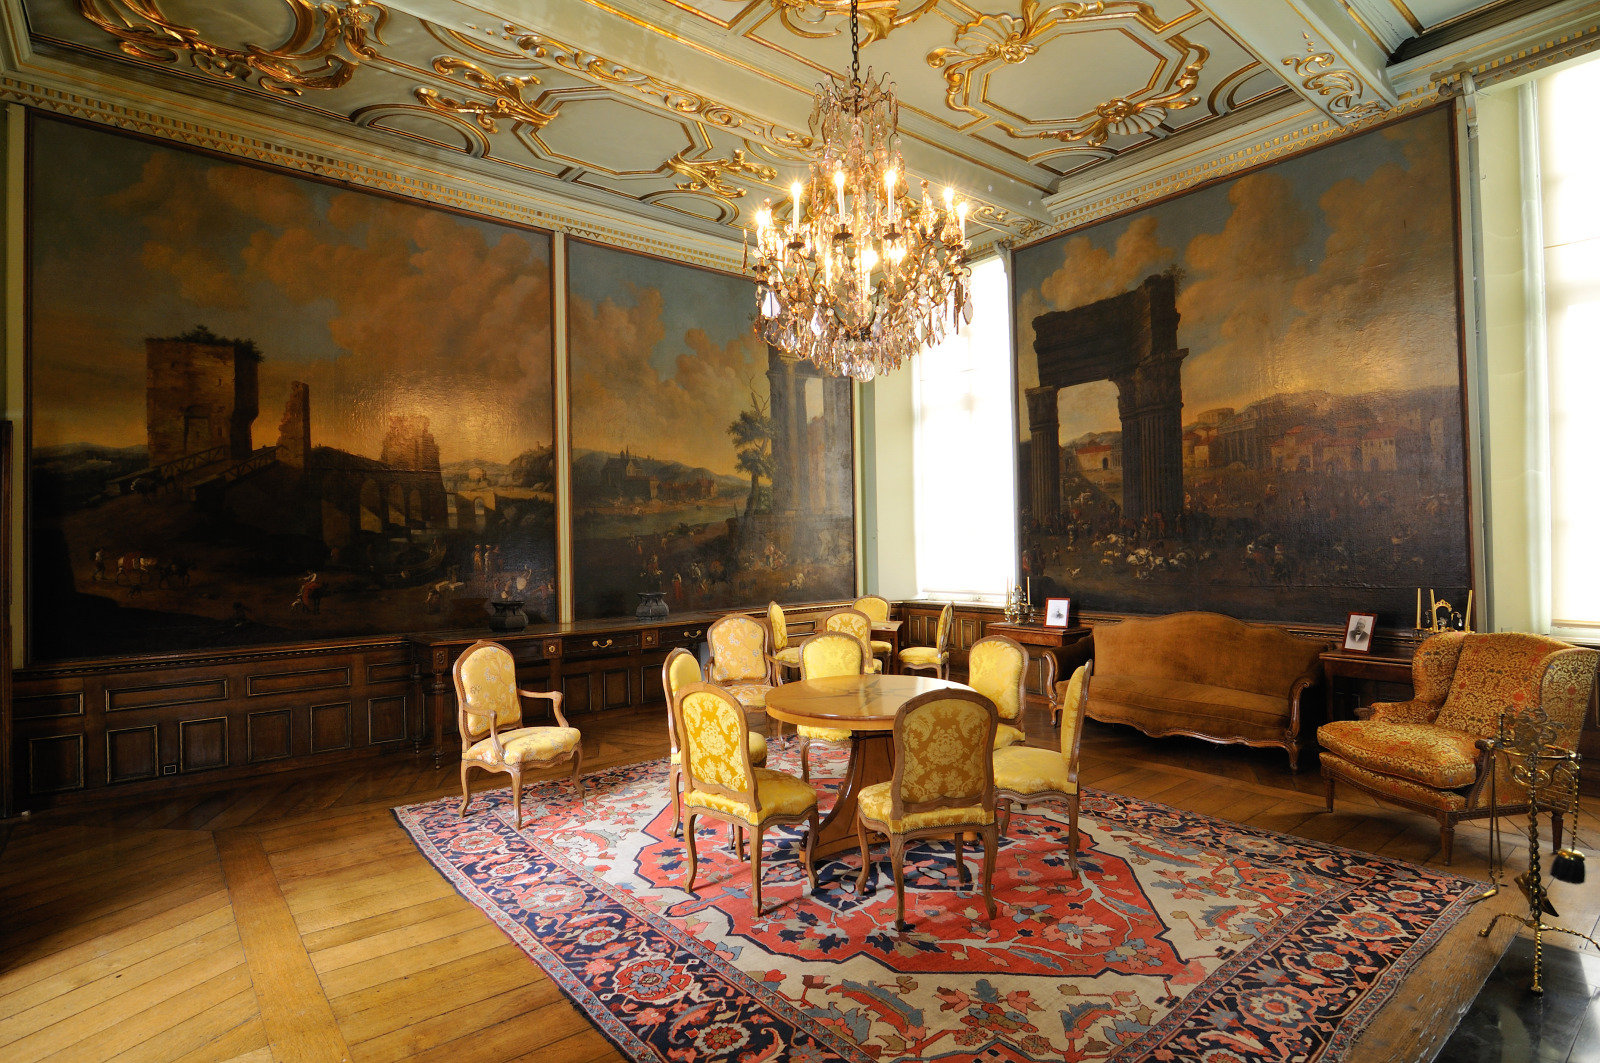 The Château de Modave room decorated with grand paintings